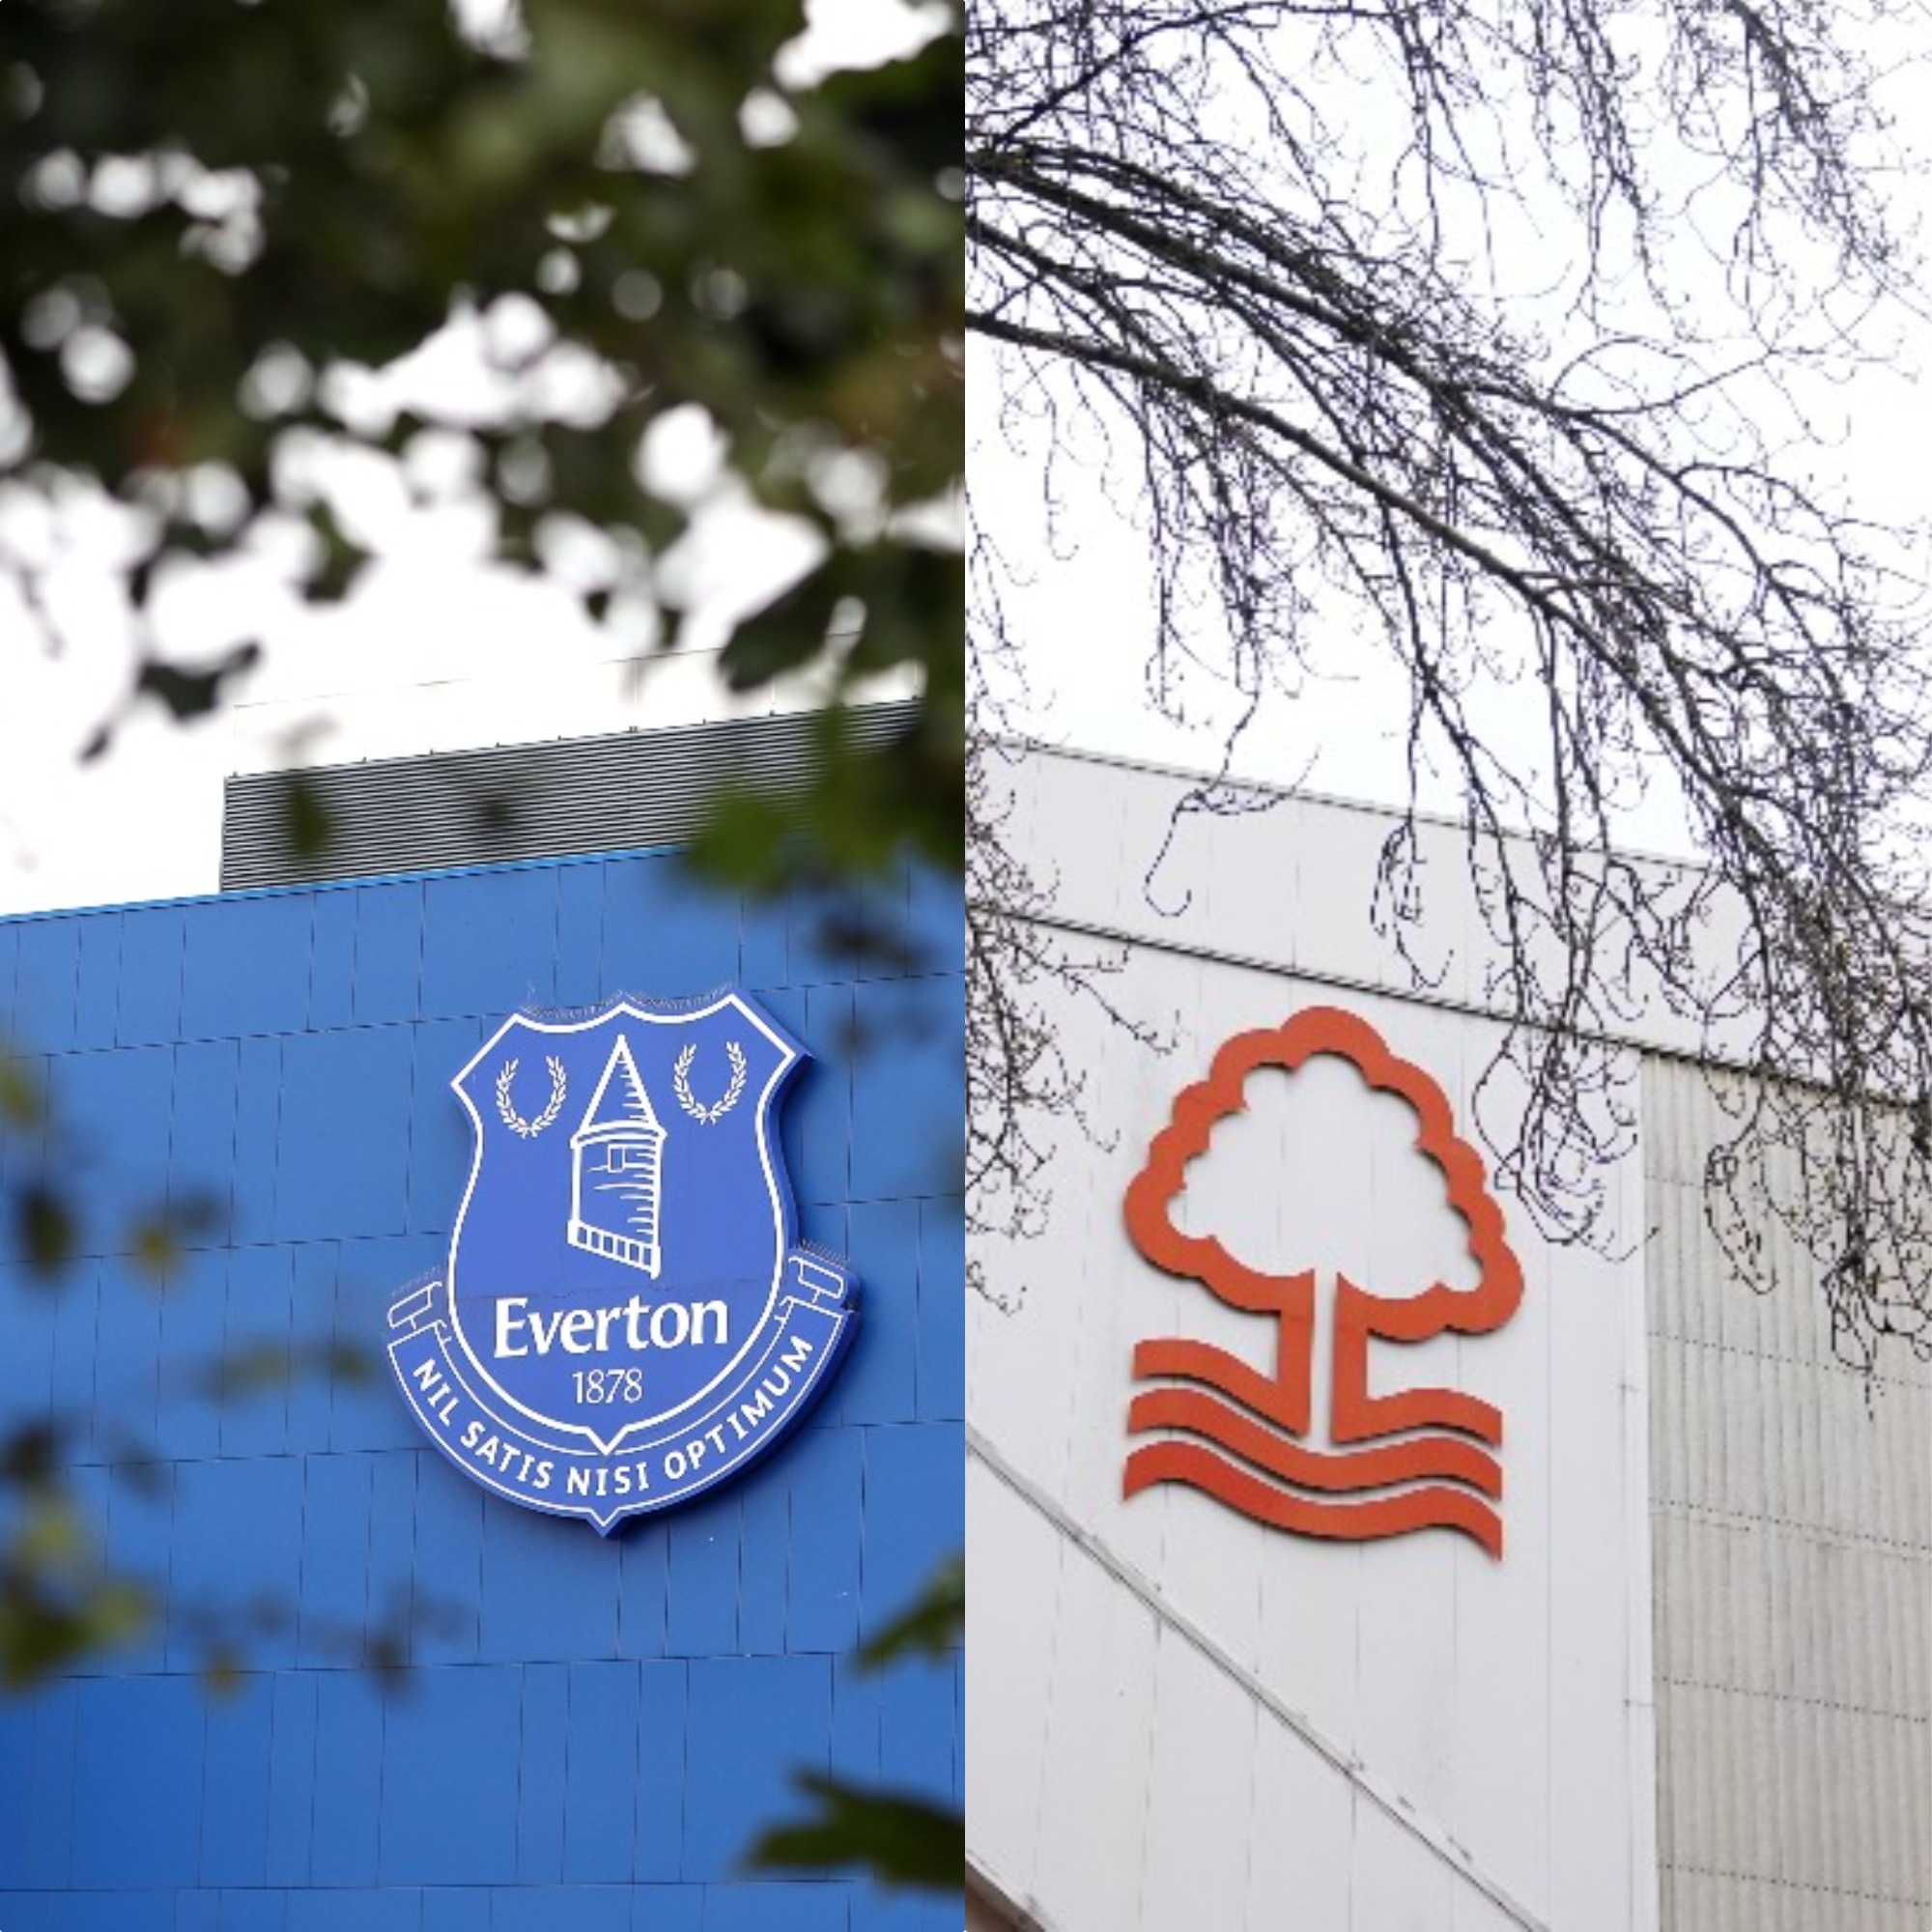 Everton and Nottingham Forest have been deducted points under the Premier League's current financial rules this season